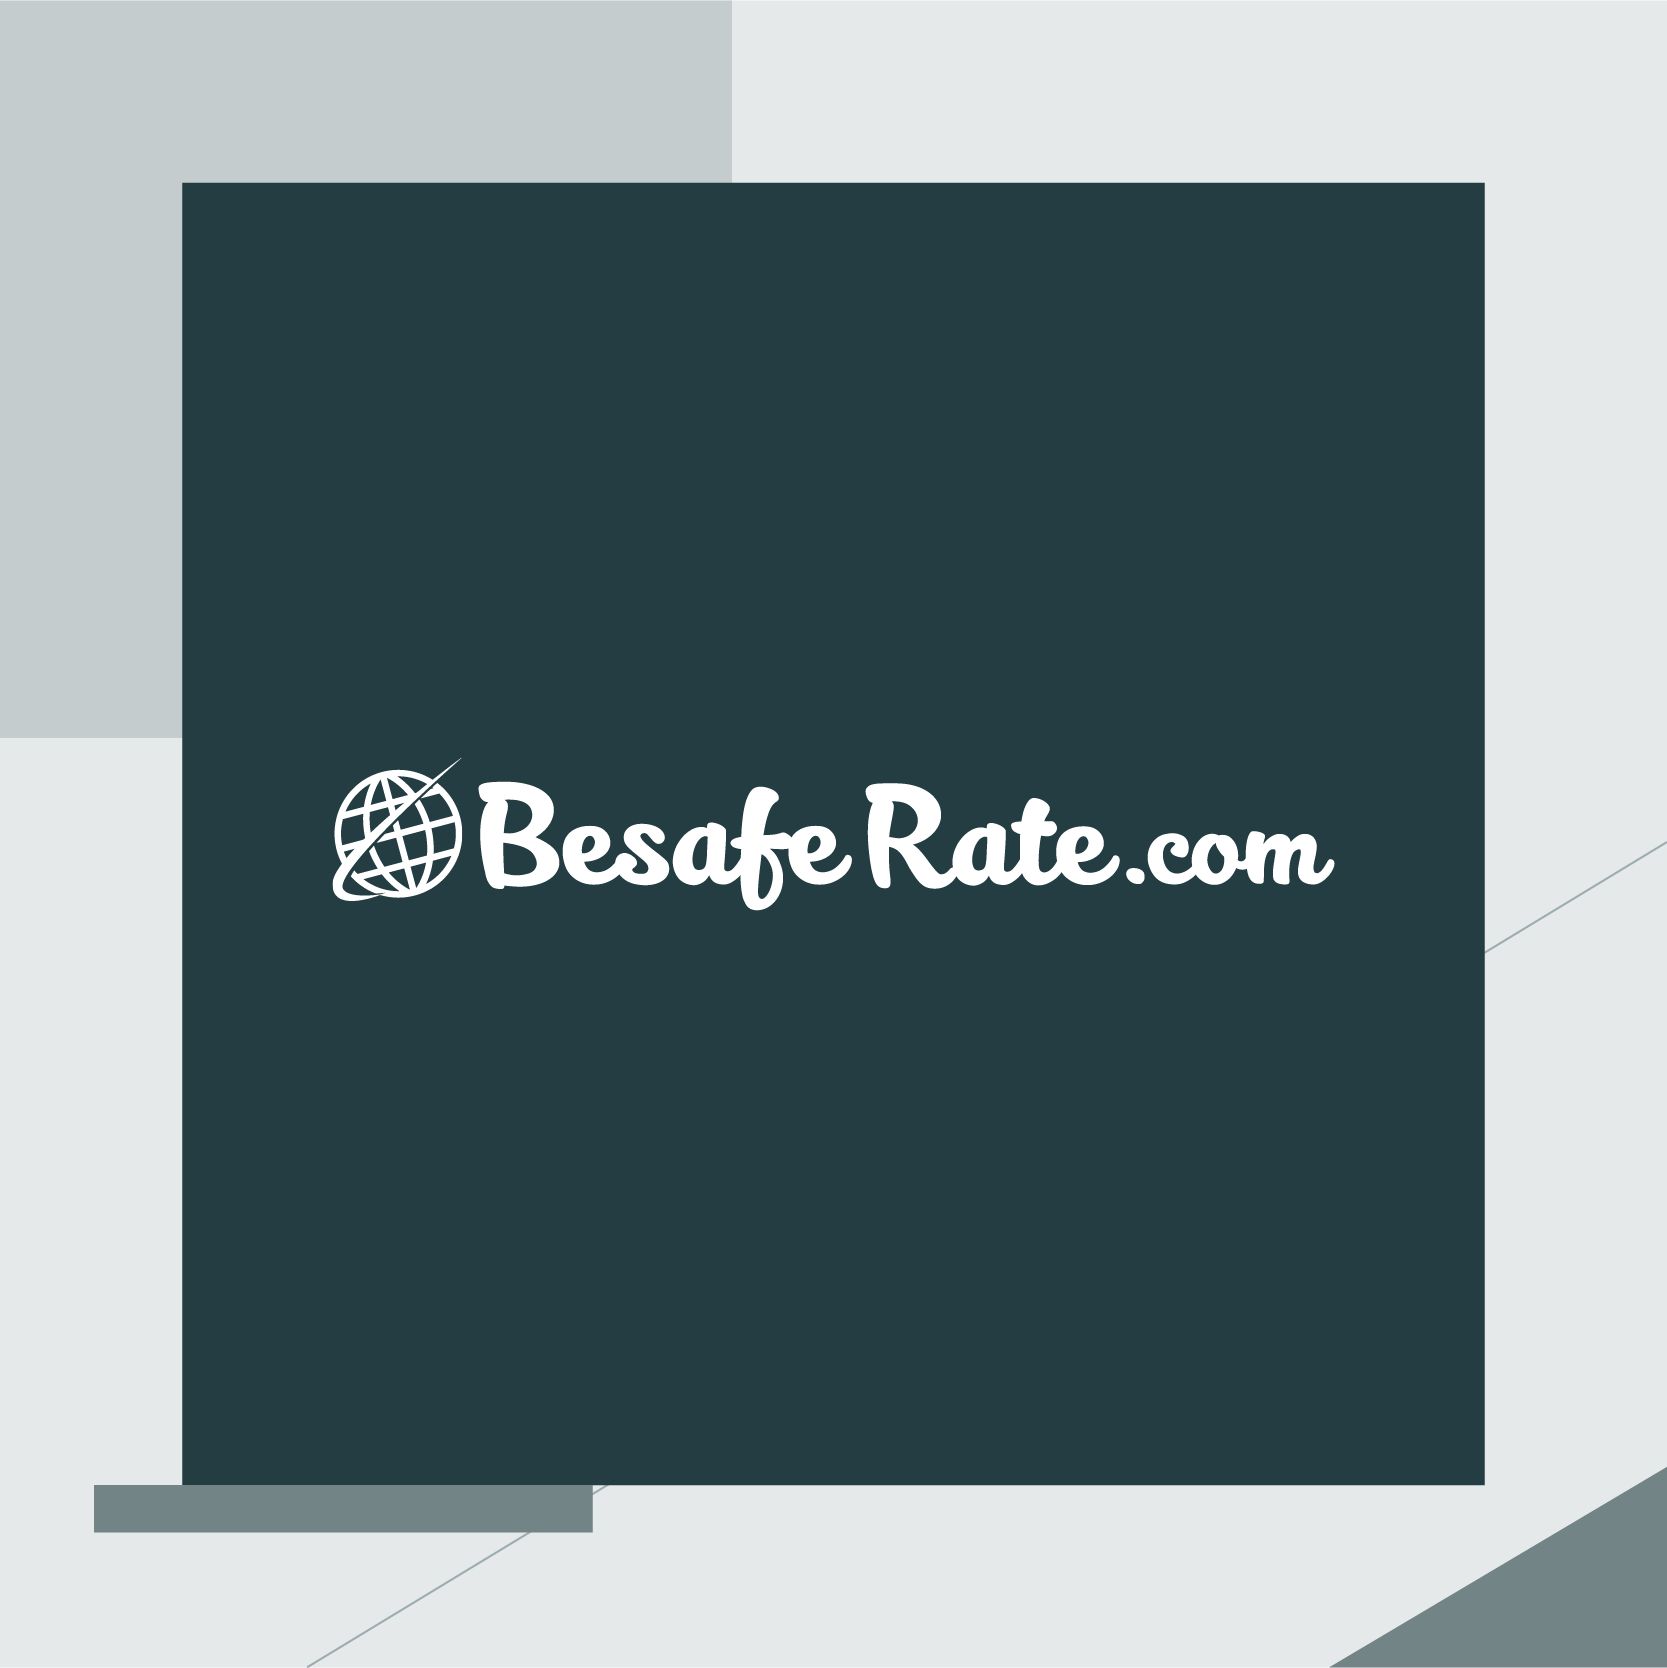 Tourism startup BeSafe Rate closes €485K investment round